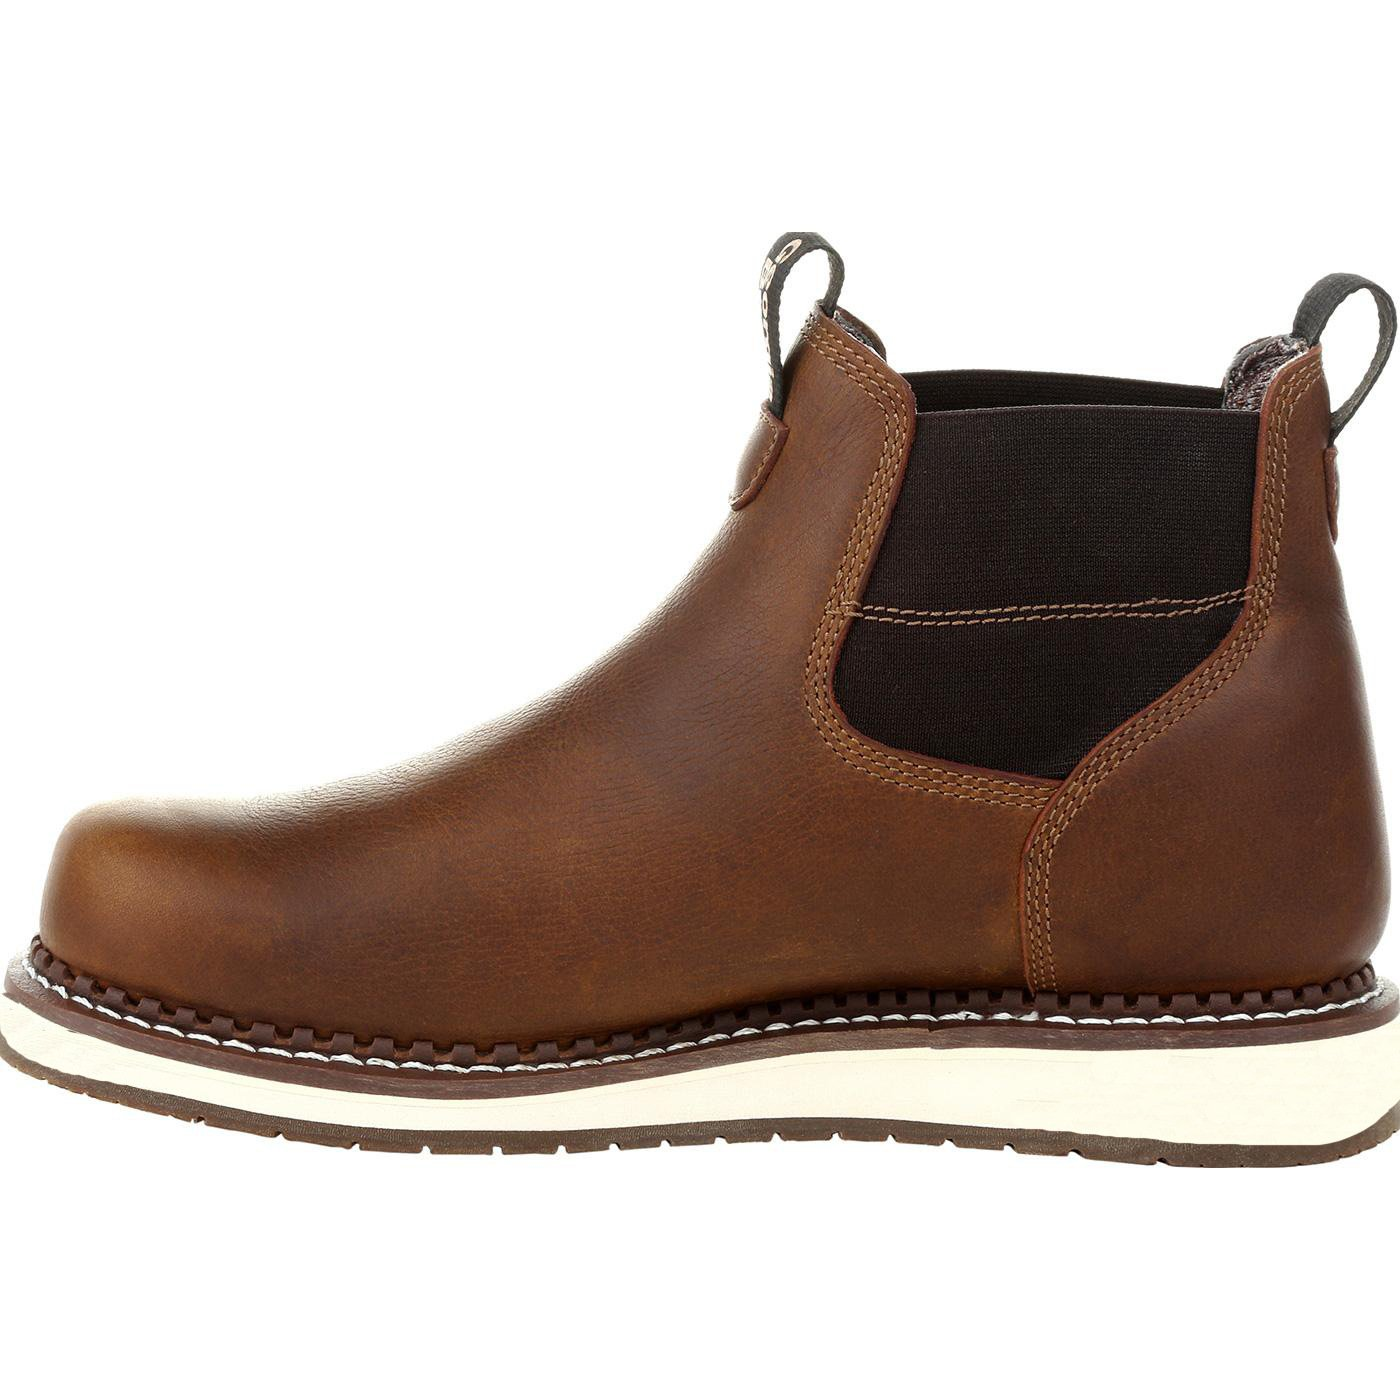 New Edition - Waterproof Chelsea Wedge Work Boots for Men